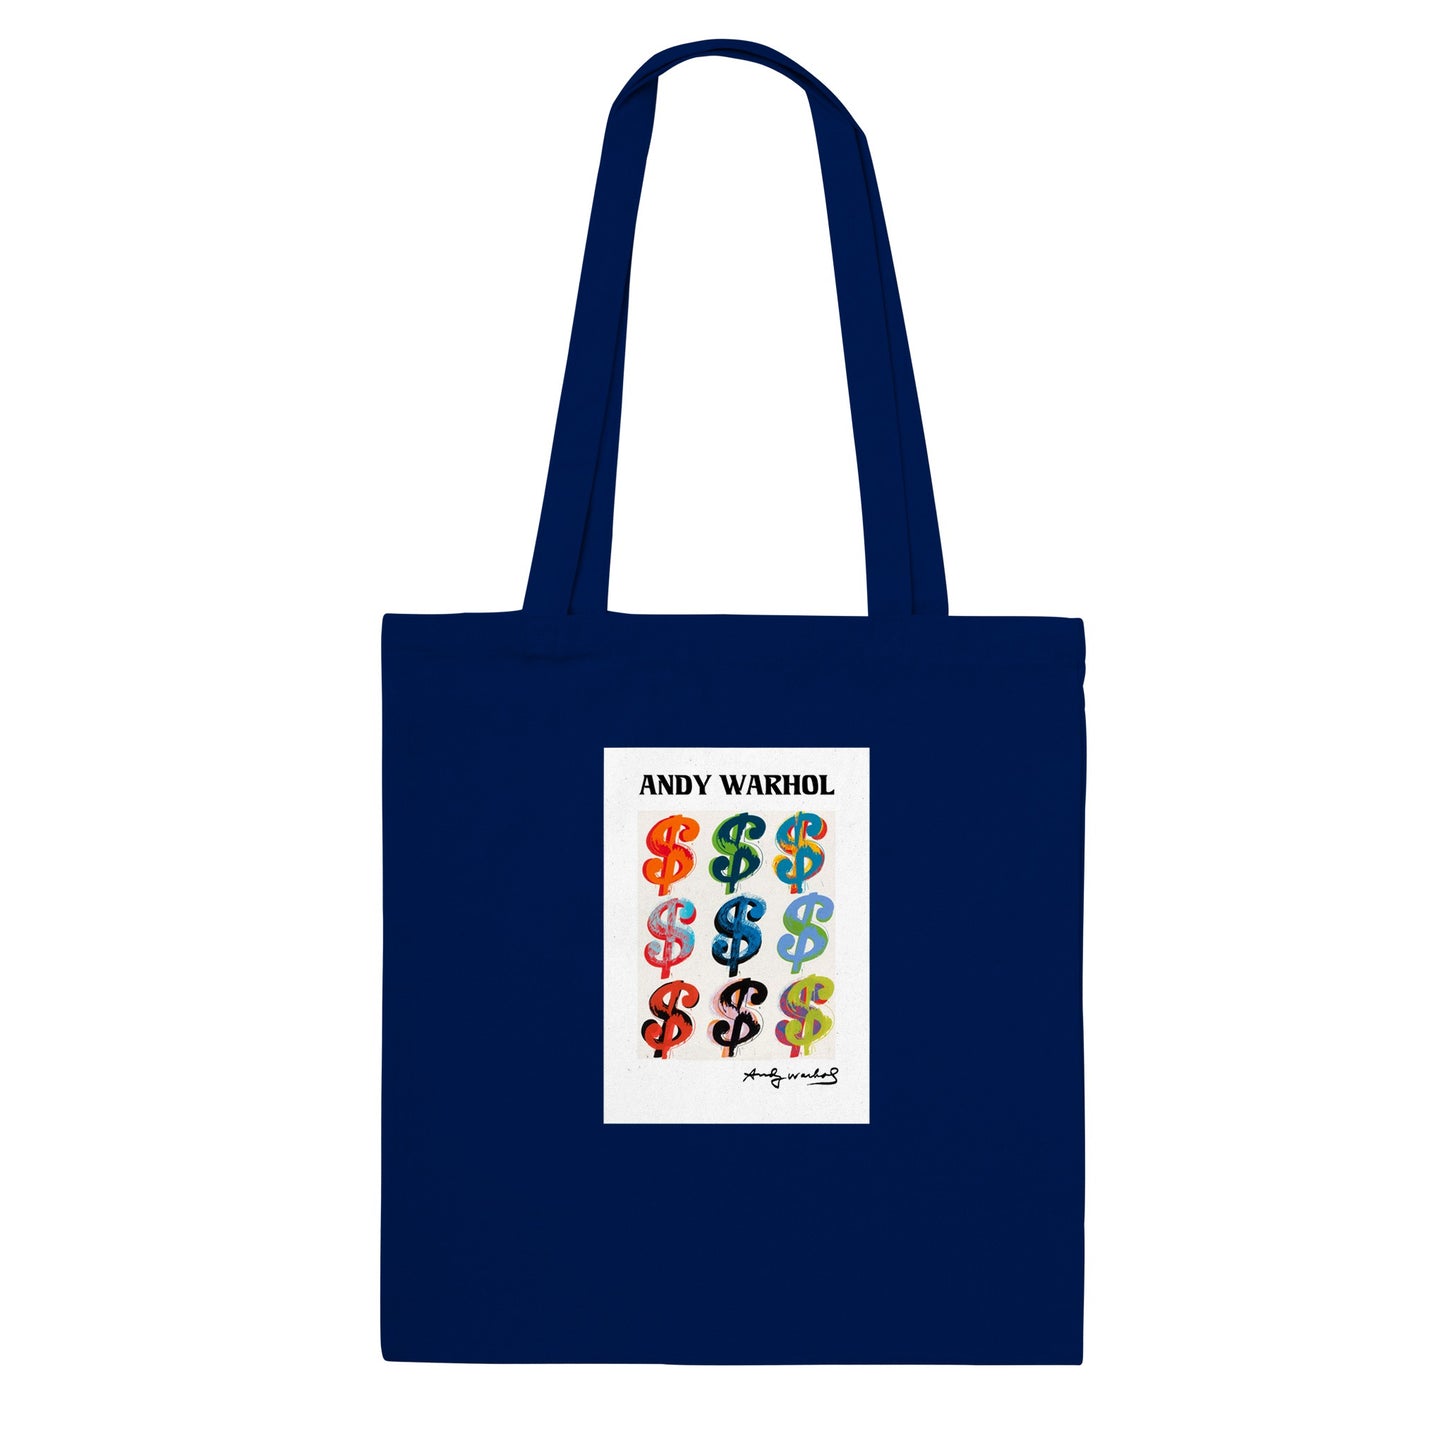 ANDY WARHOL - DOLLAR SIGN - CLASSIC TOTE BAG